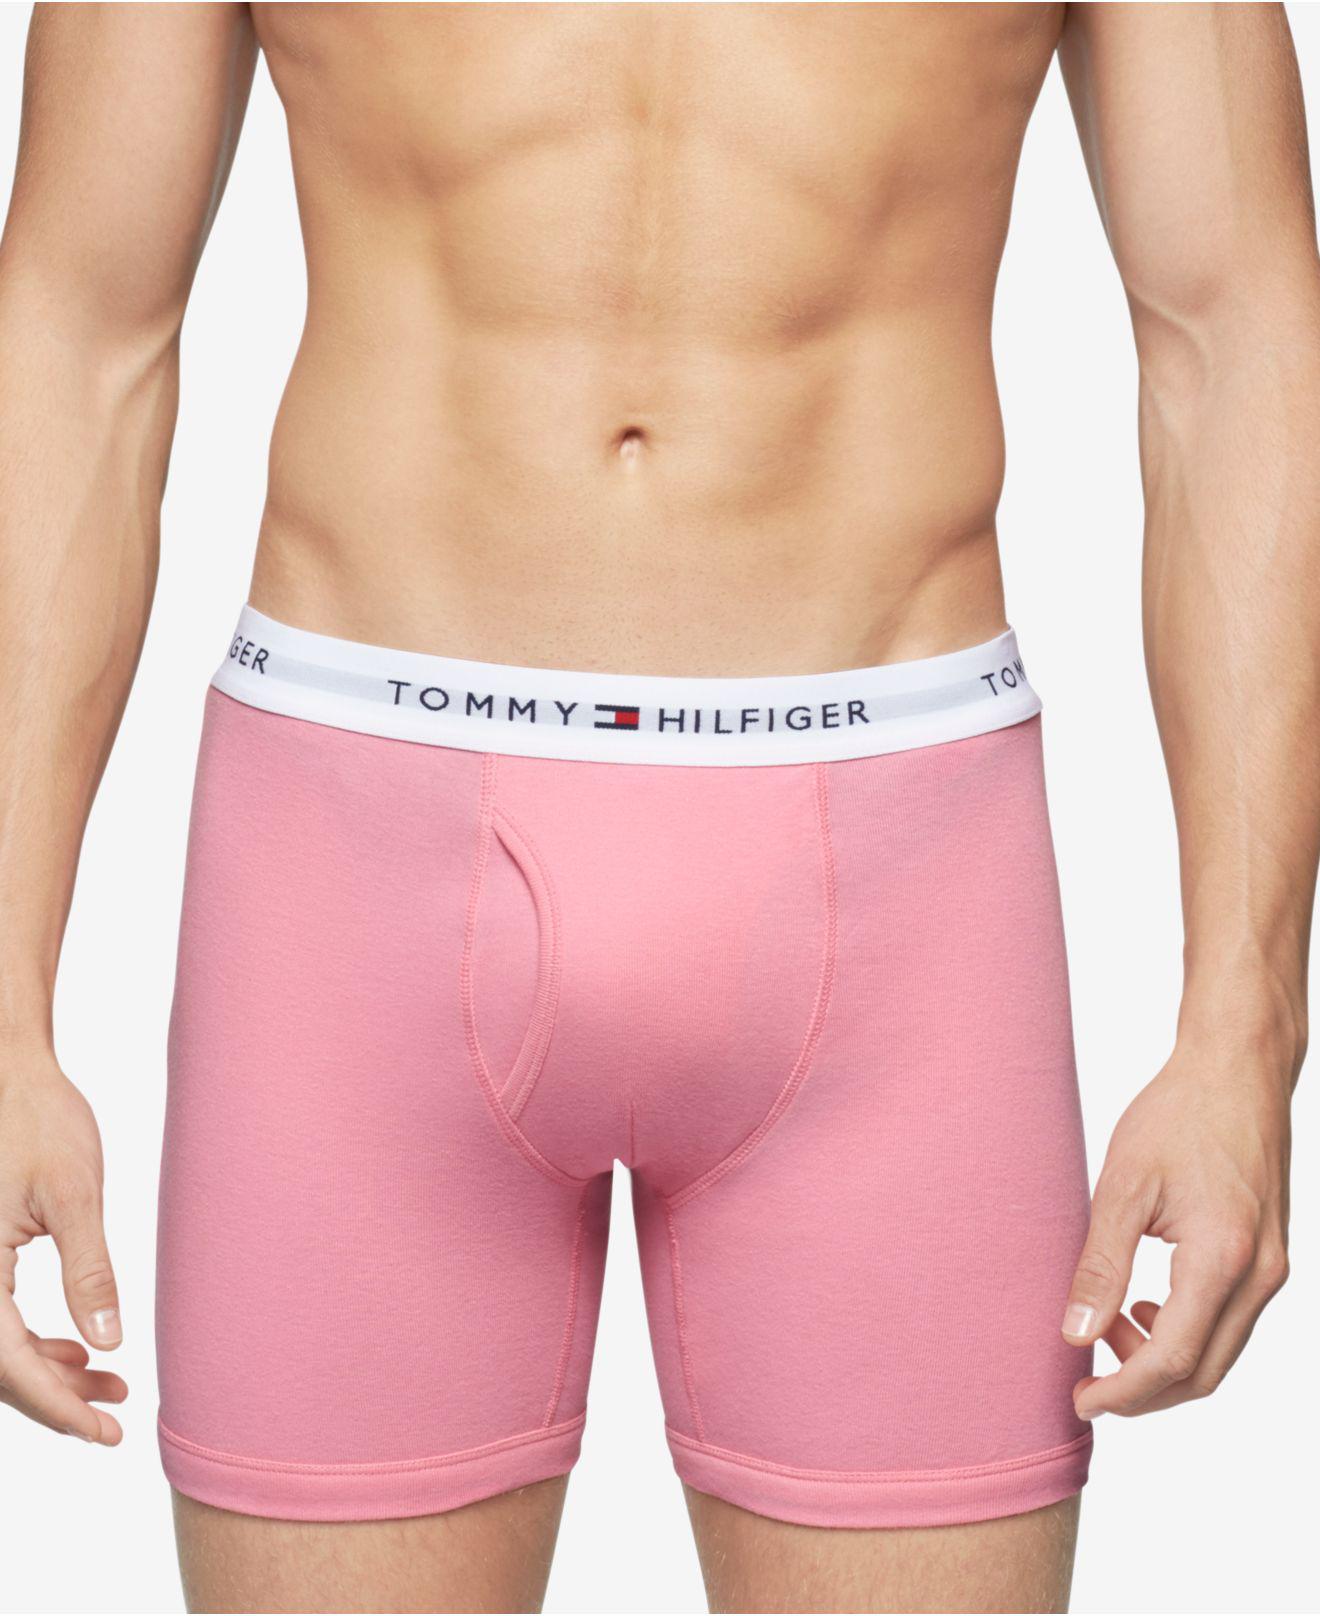 pink tommy hilfiger boxers